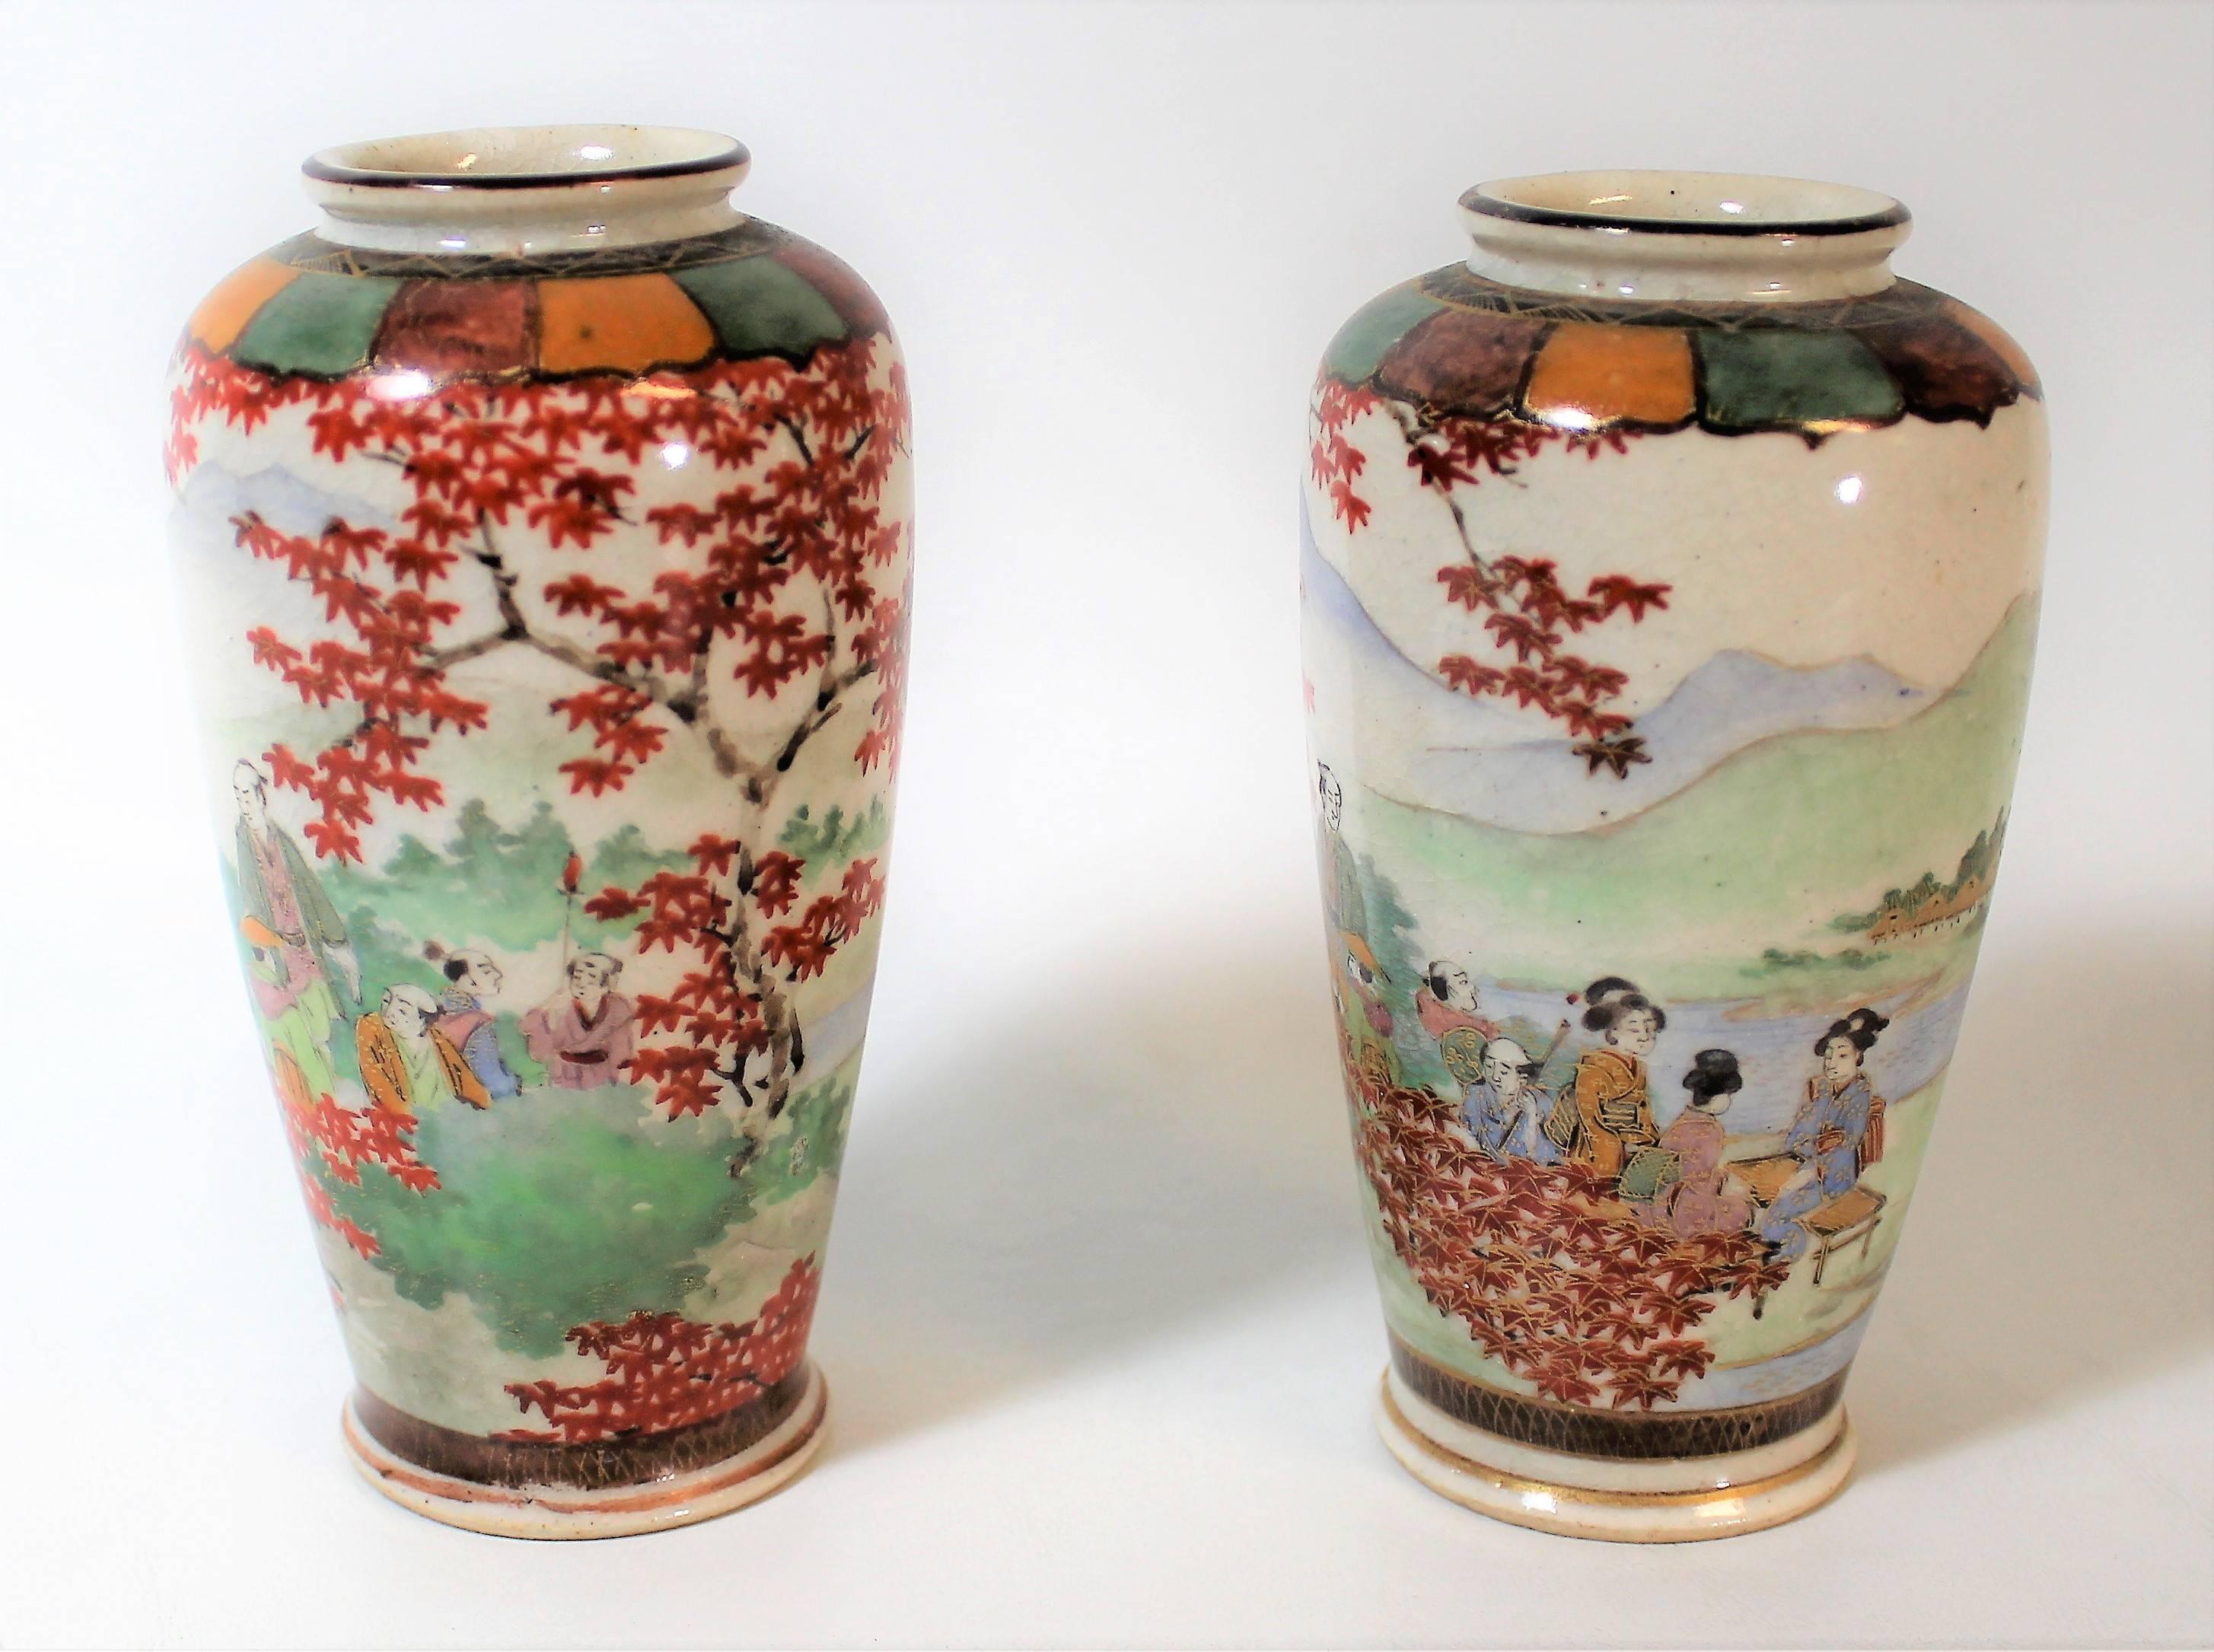 19th Century Pair of Japanese Meiji Period Hand-Painted Porcelain Vases